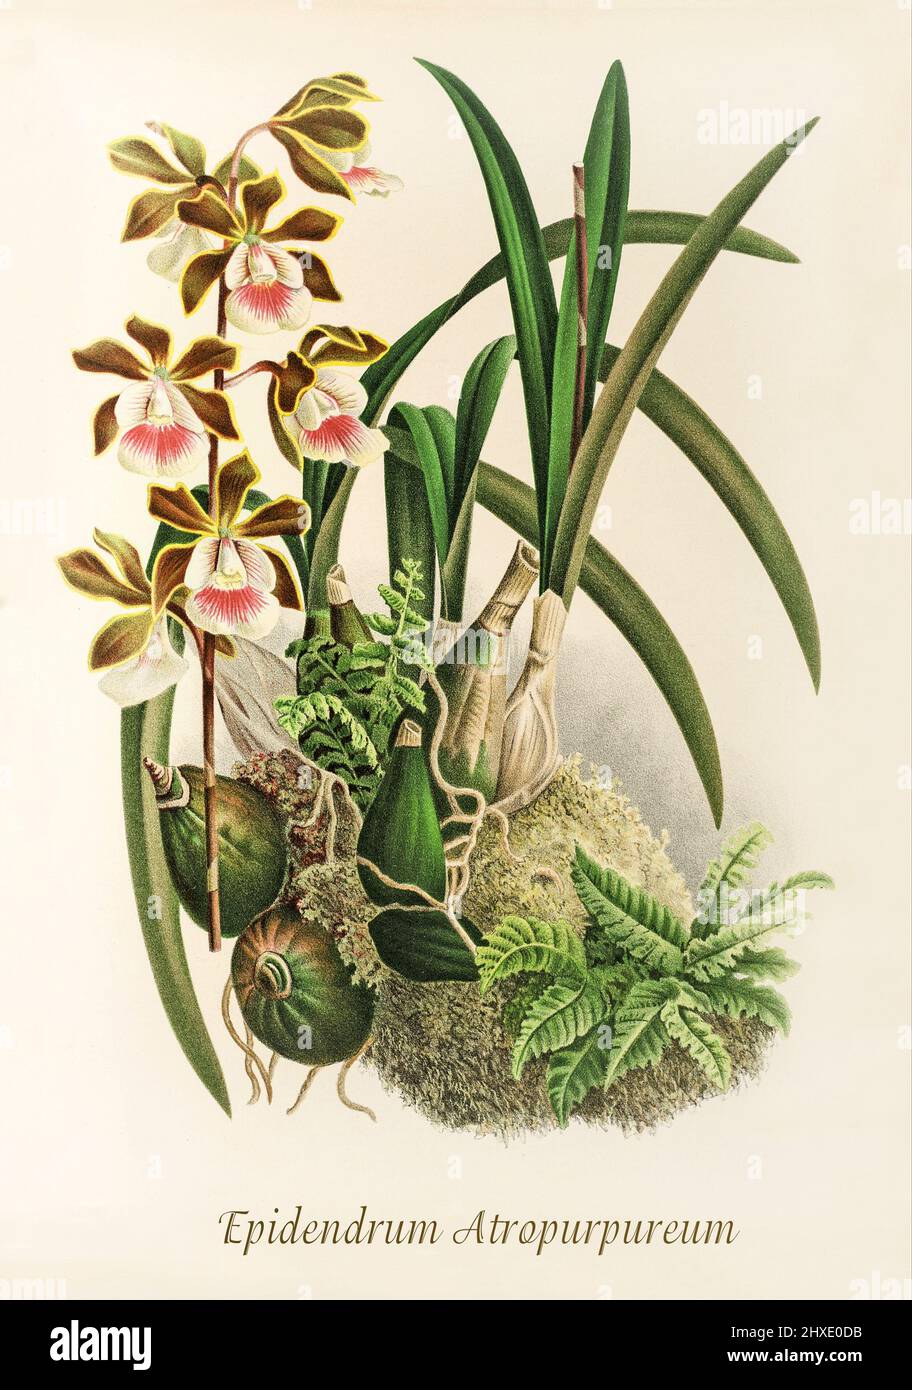 Epidendrum atropurpureum, a small to medium sized orchid found in Dominican Republic and Haiti in cactus thorn scrub, semi-arid pine woods and broadleafed forests at elevations of sea level to 1100 meters. From Iconographie des Orchidees, a magazine of botanical illustrations published by Jean Jules Linden (1817-1898) was a Belgian botanist, explorer and horticulturist who specialised in orchids. Stock Photo